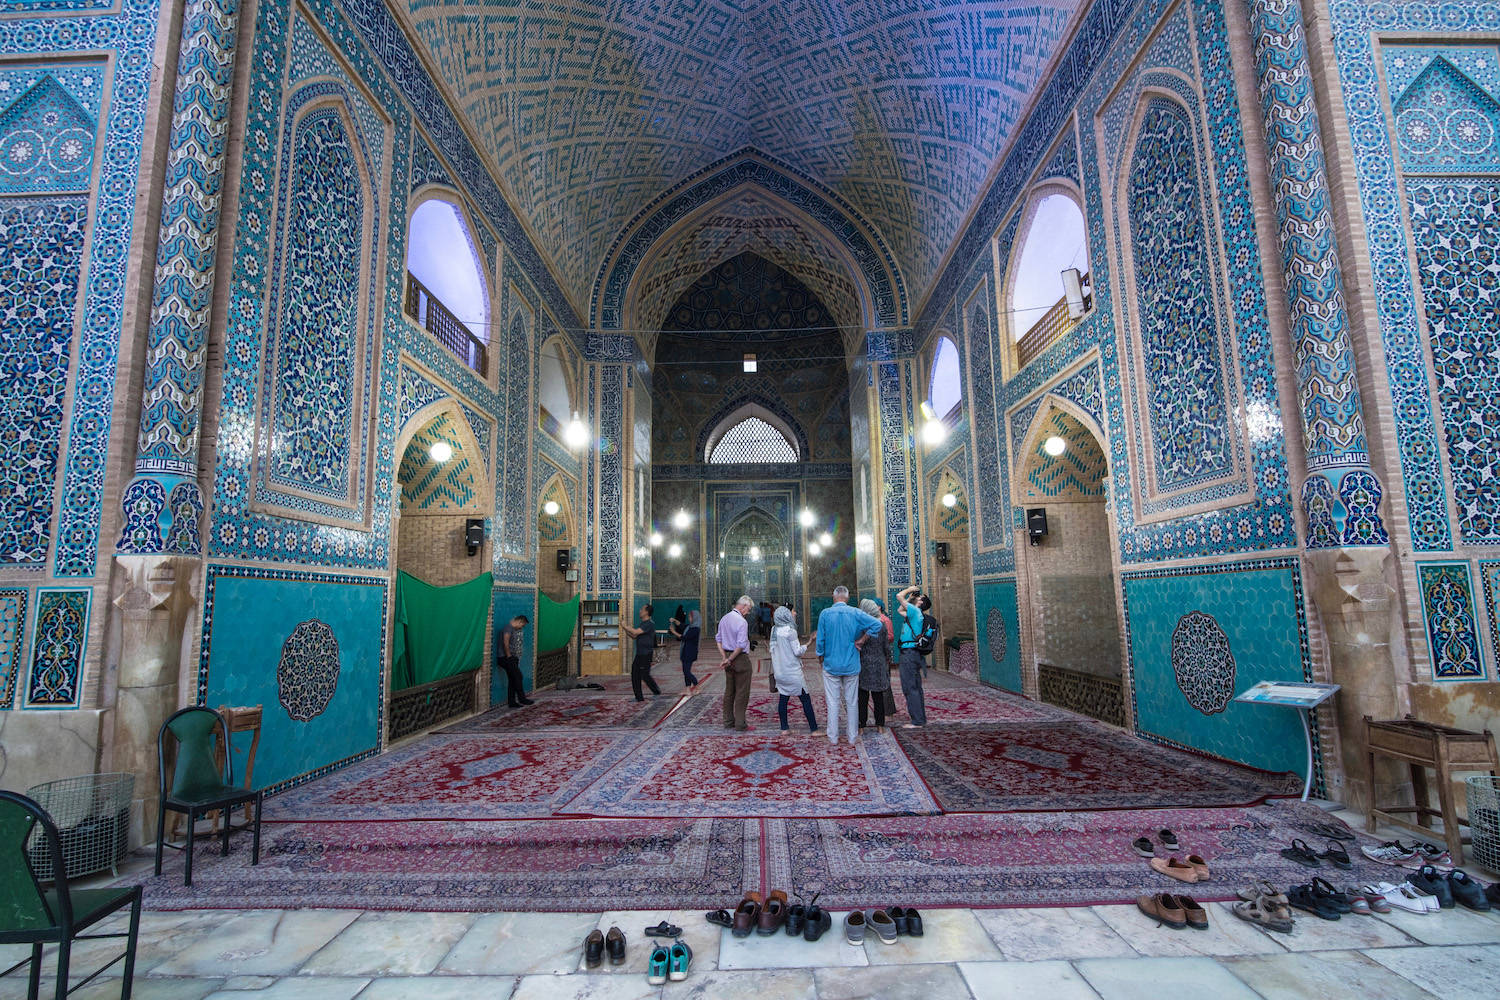 Inside The Mosque In Iran Wallpaper